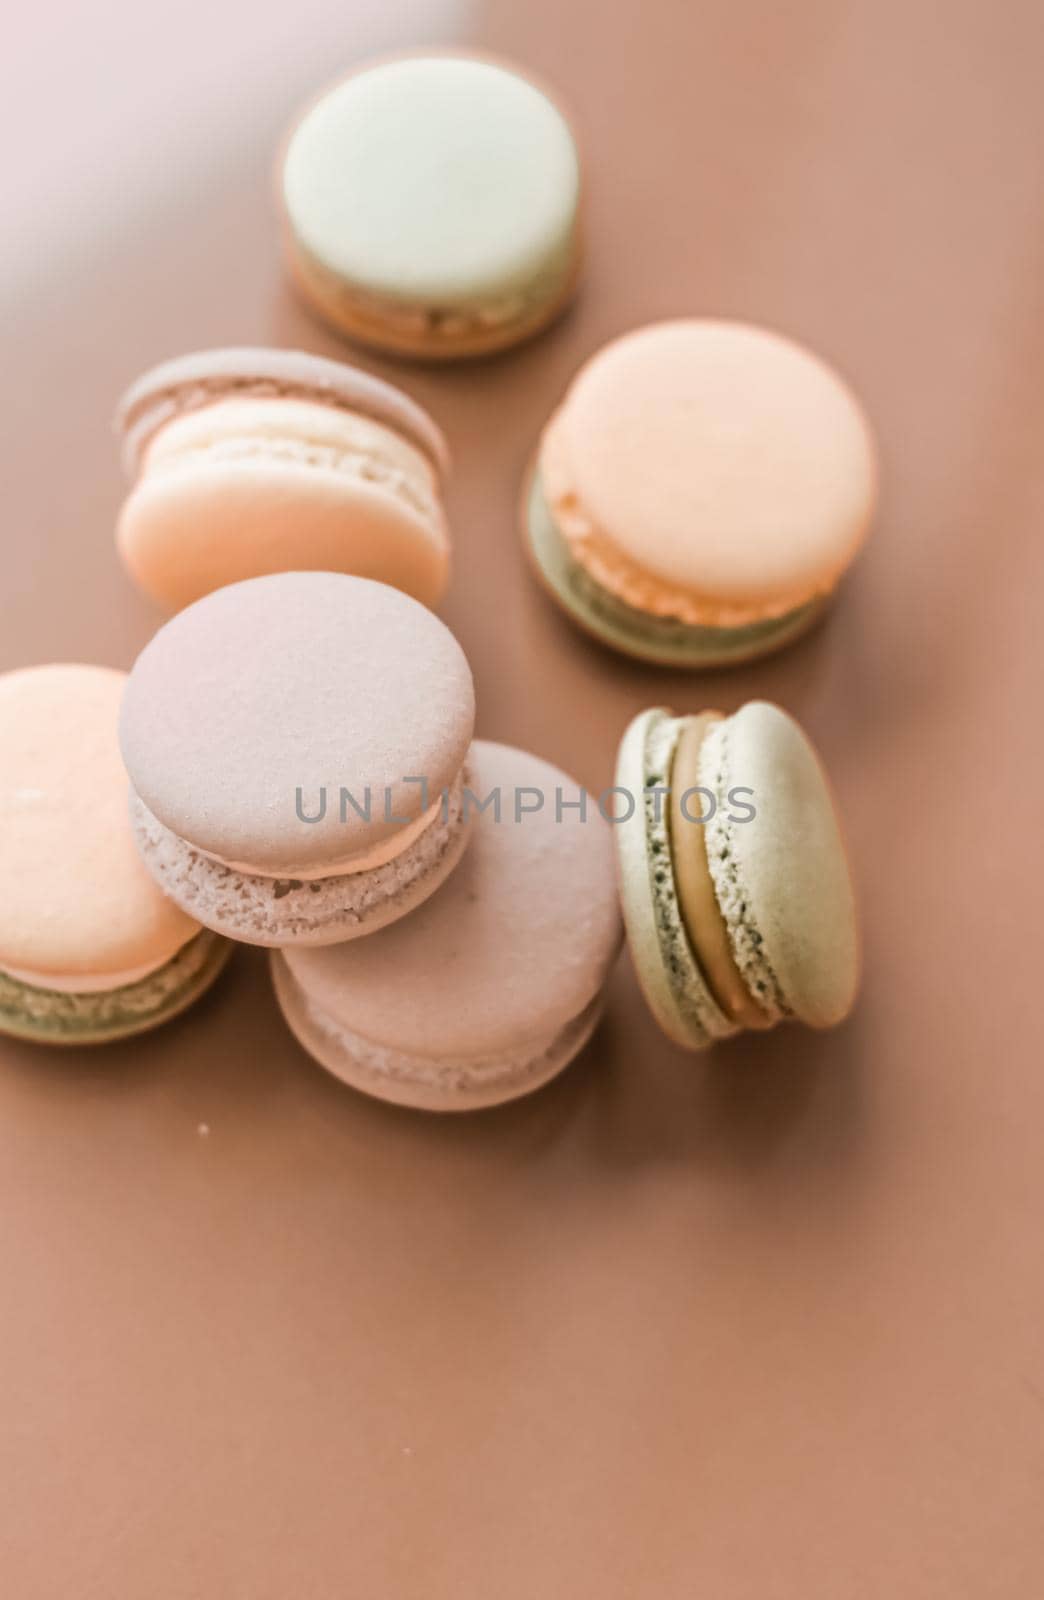 Pastry, bakery and branding concept - French macaroons on cream beige background, parisian chic cafe dessert, sweet food and cake macaron for luxury confectionery brand, holiday backdrop design